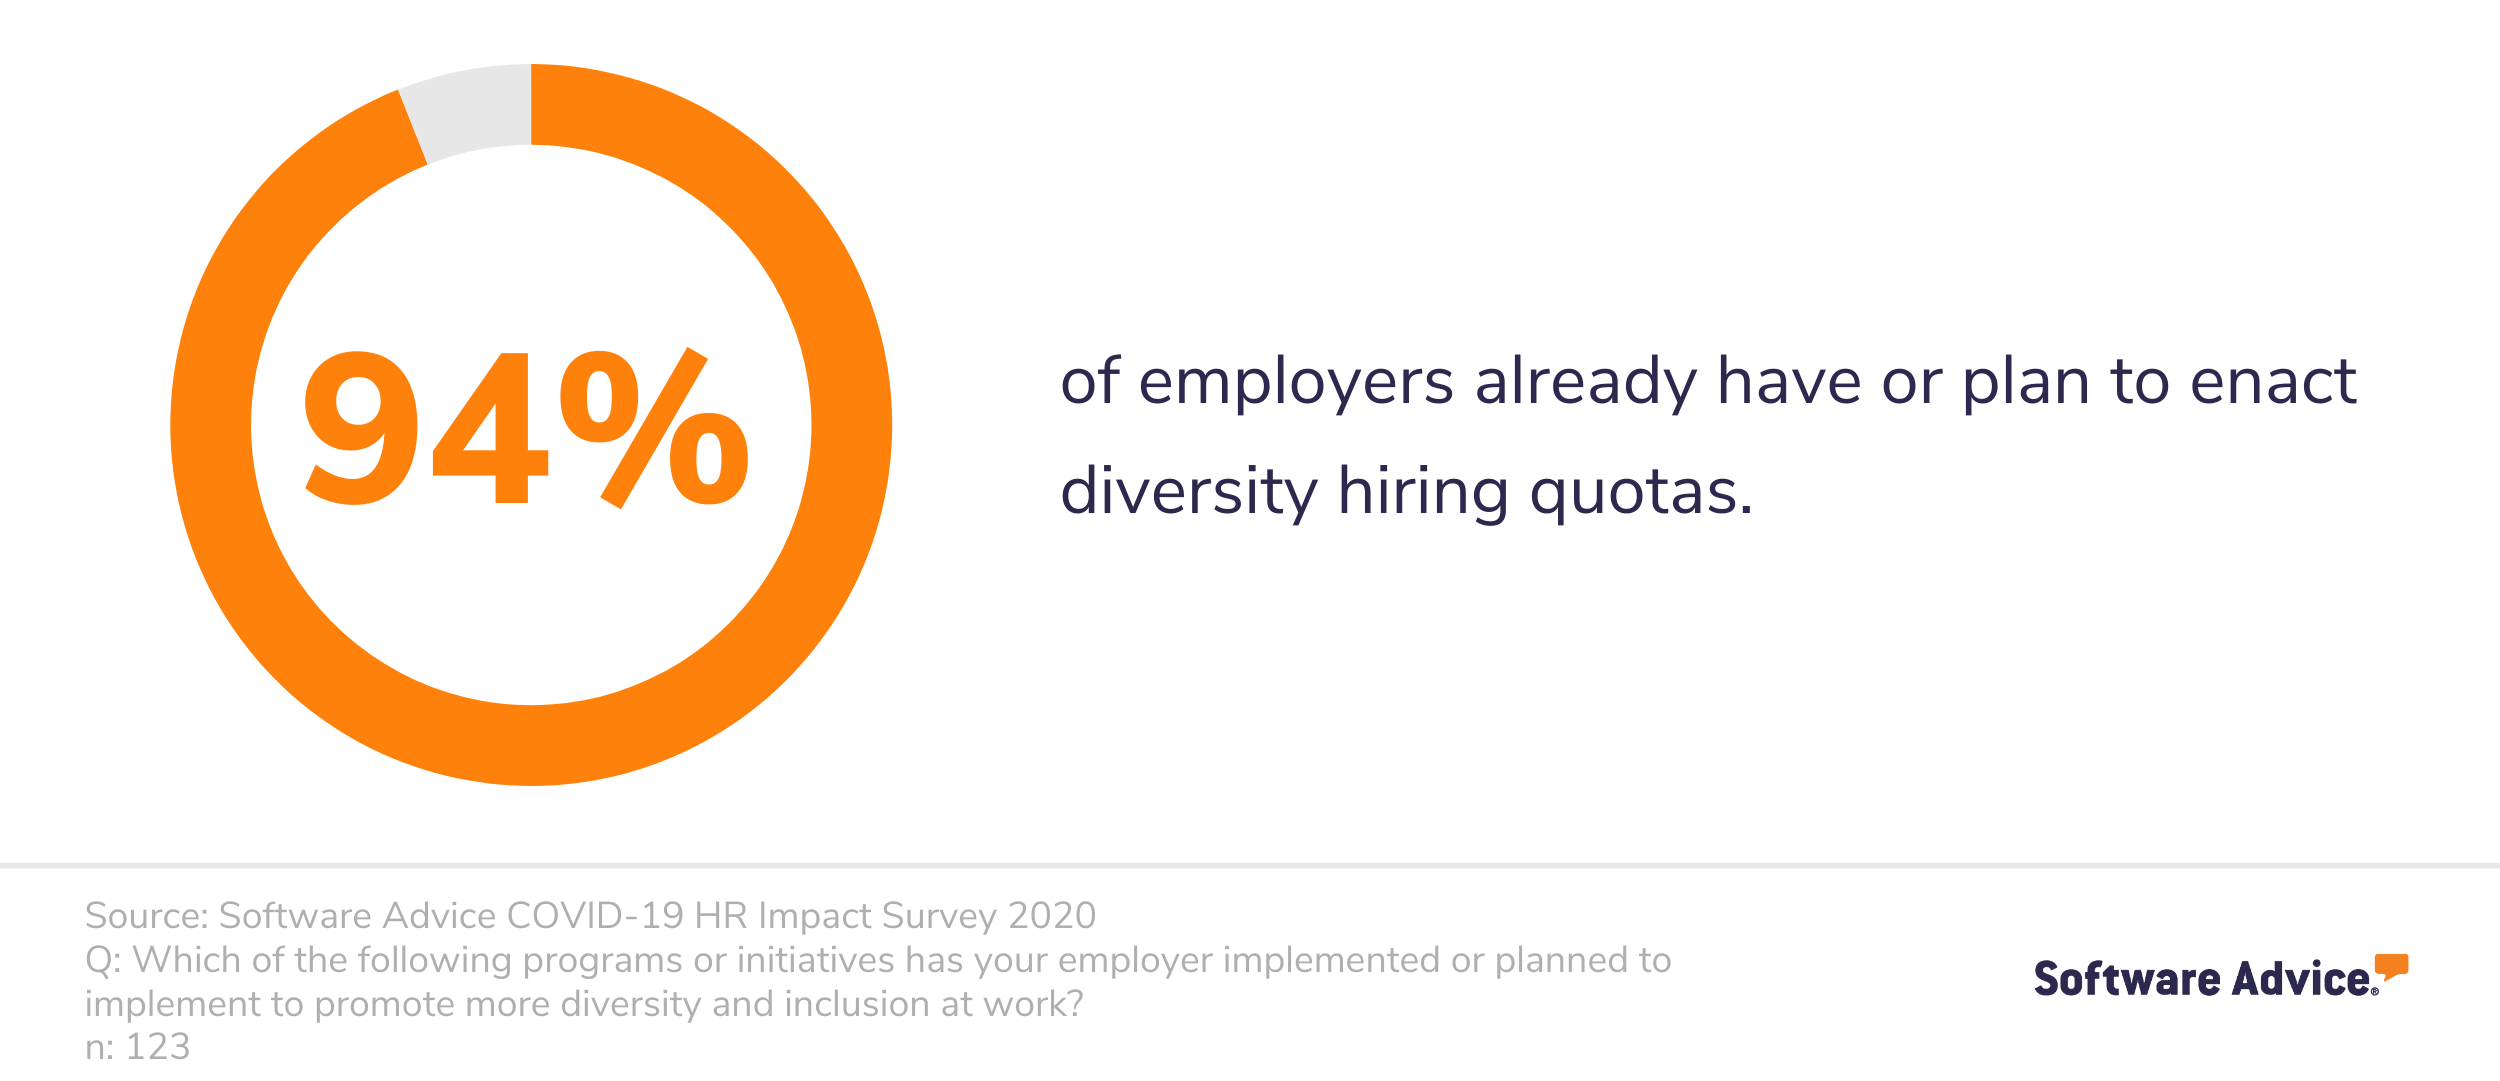 94%-of-employers-have-or-plan-to-enact-diversity-hiring-quotas